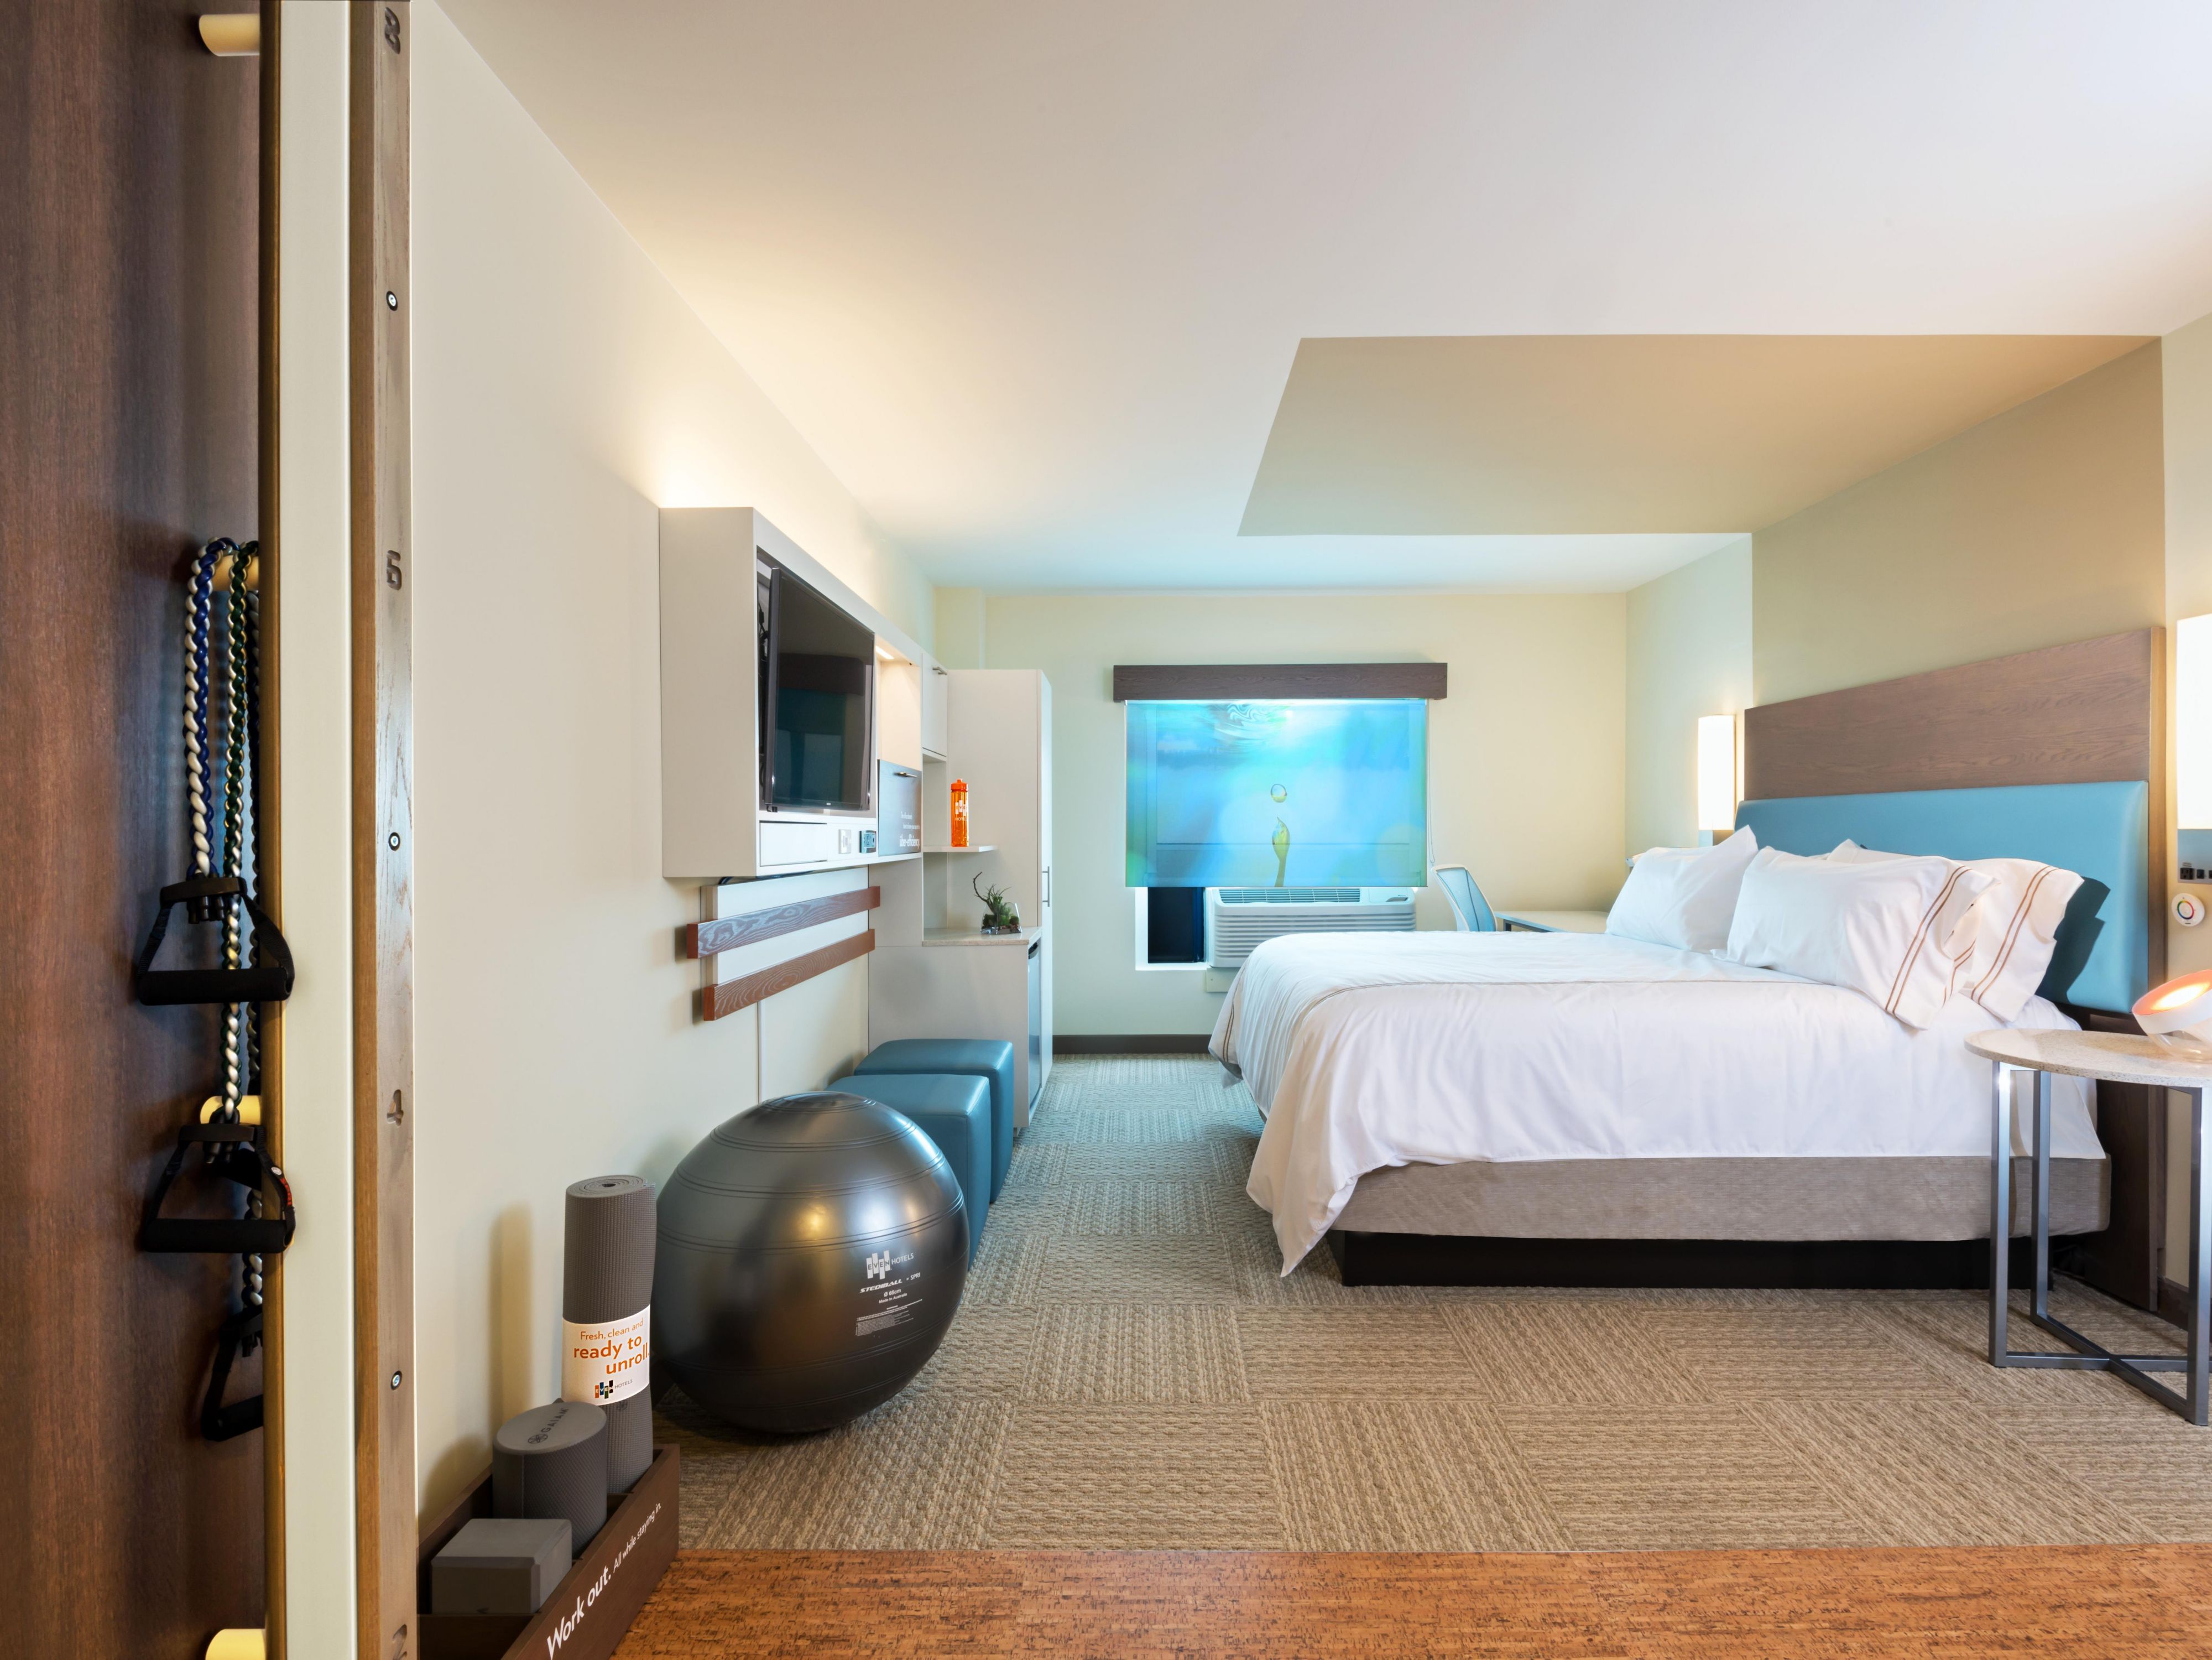 Easily balance your daily routine with the hotel's in-room fitness equipment and further enhance your workouts with on-demand training videos. Accomplish more with spacious workspaces and free Wi-Fi, while premium bedding with cooling technology allows you to sleep well and awake refreshed.​